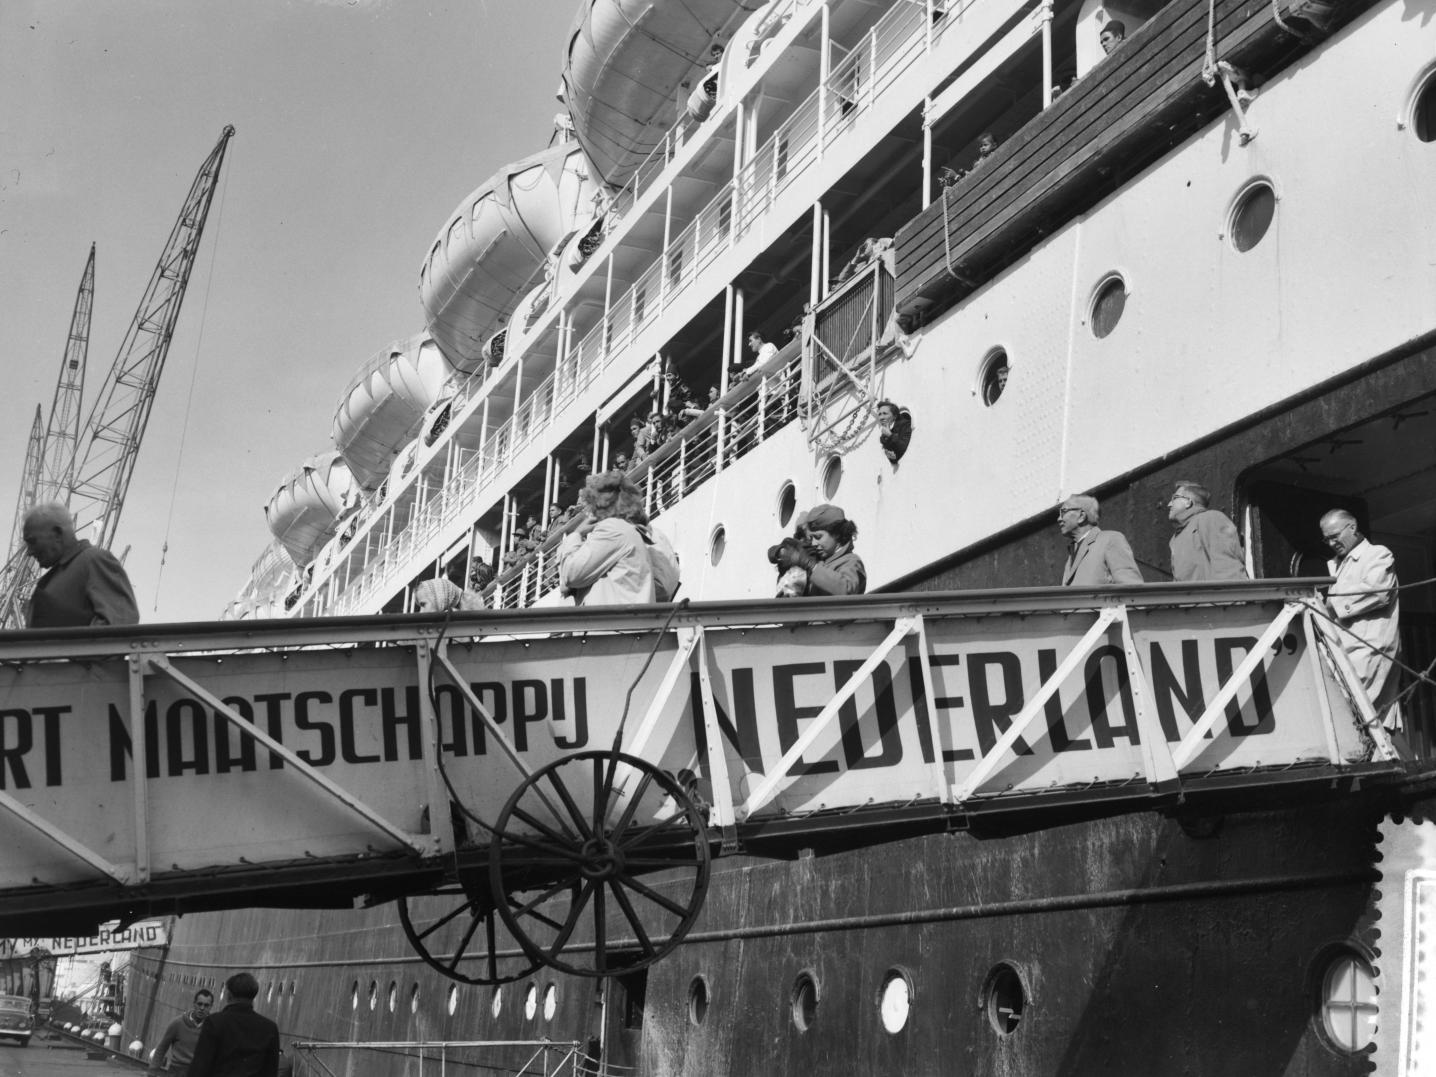 people descending from a large vessel coming from Indonesia in Amsterdam in 1958